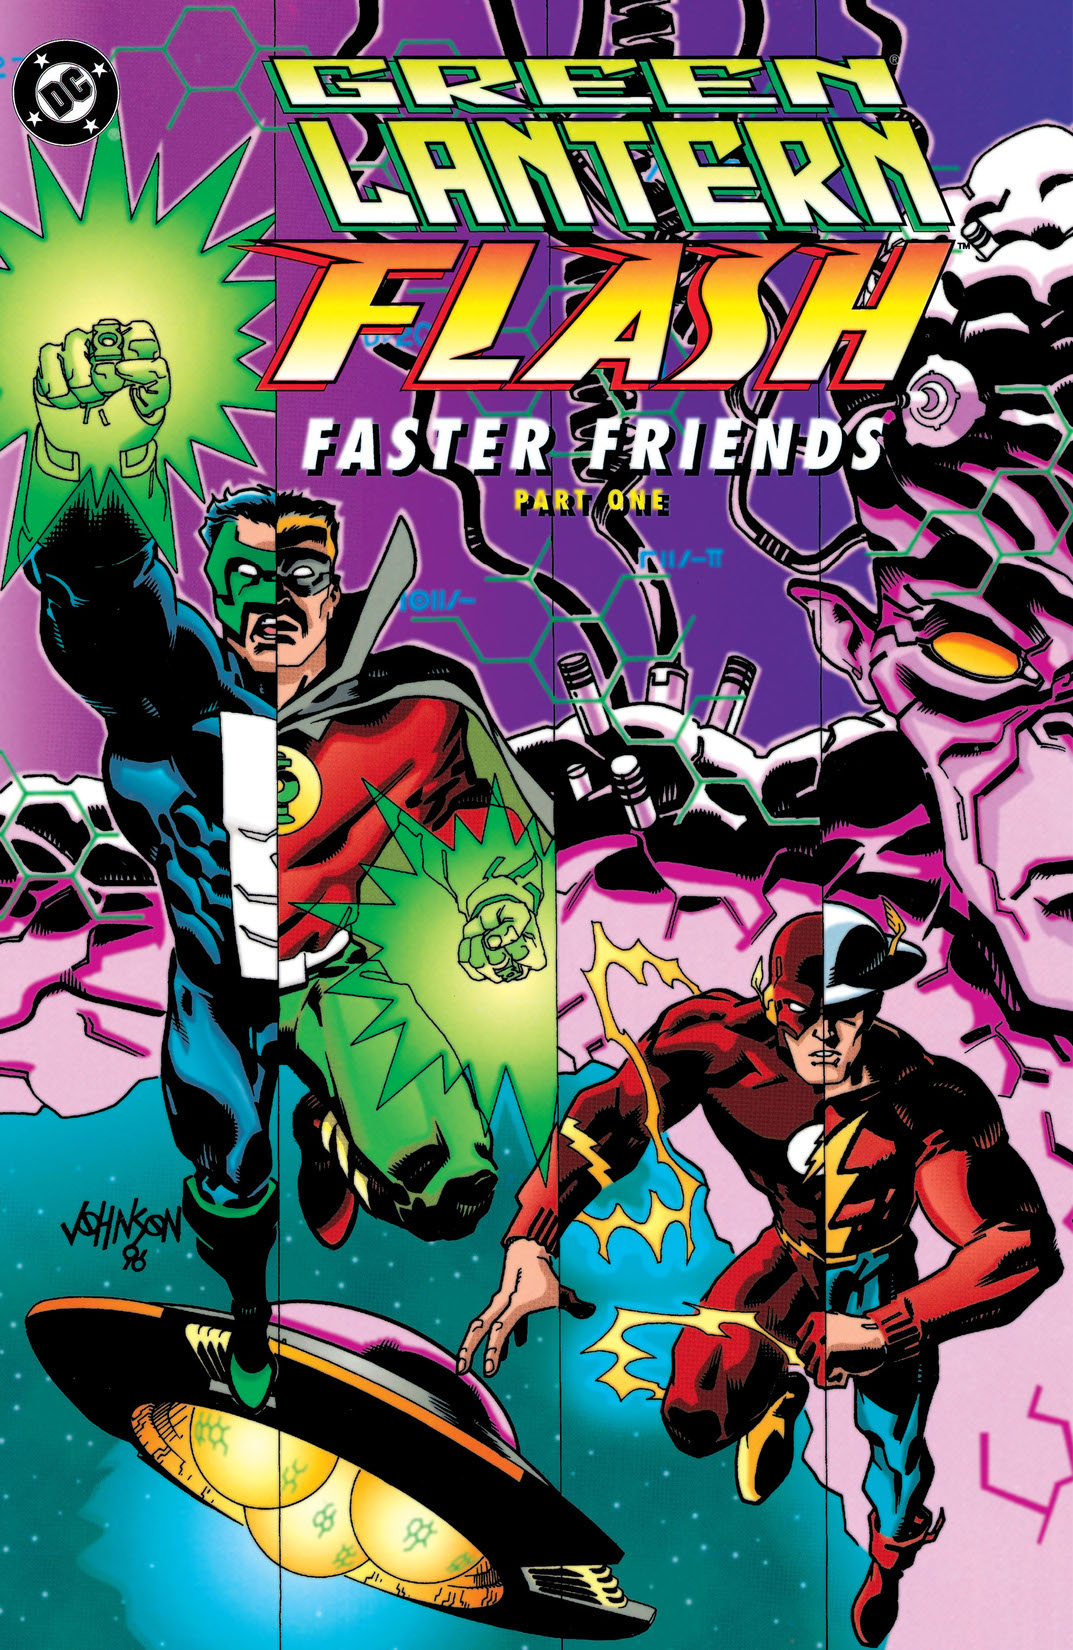 Green Lantern/Flash: Faster Friends Part 1 #1 preview images